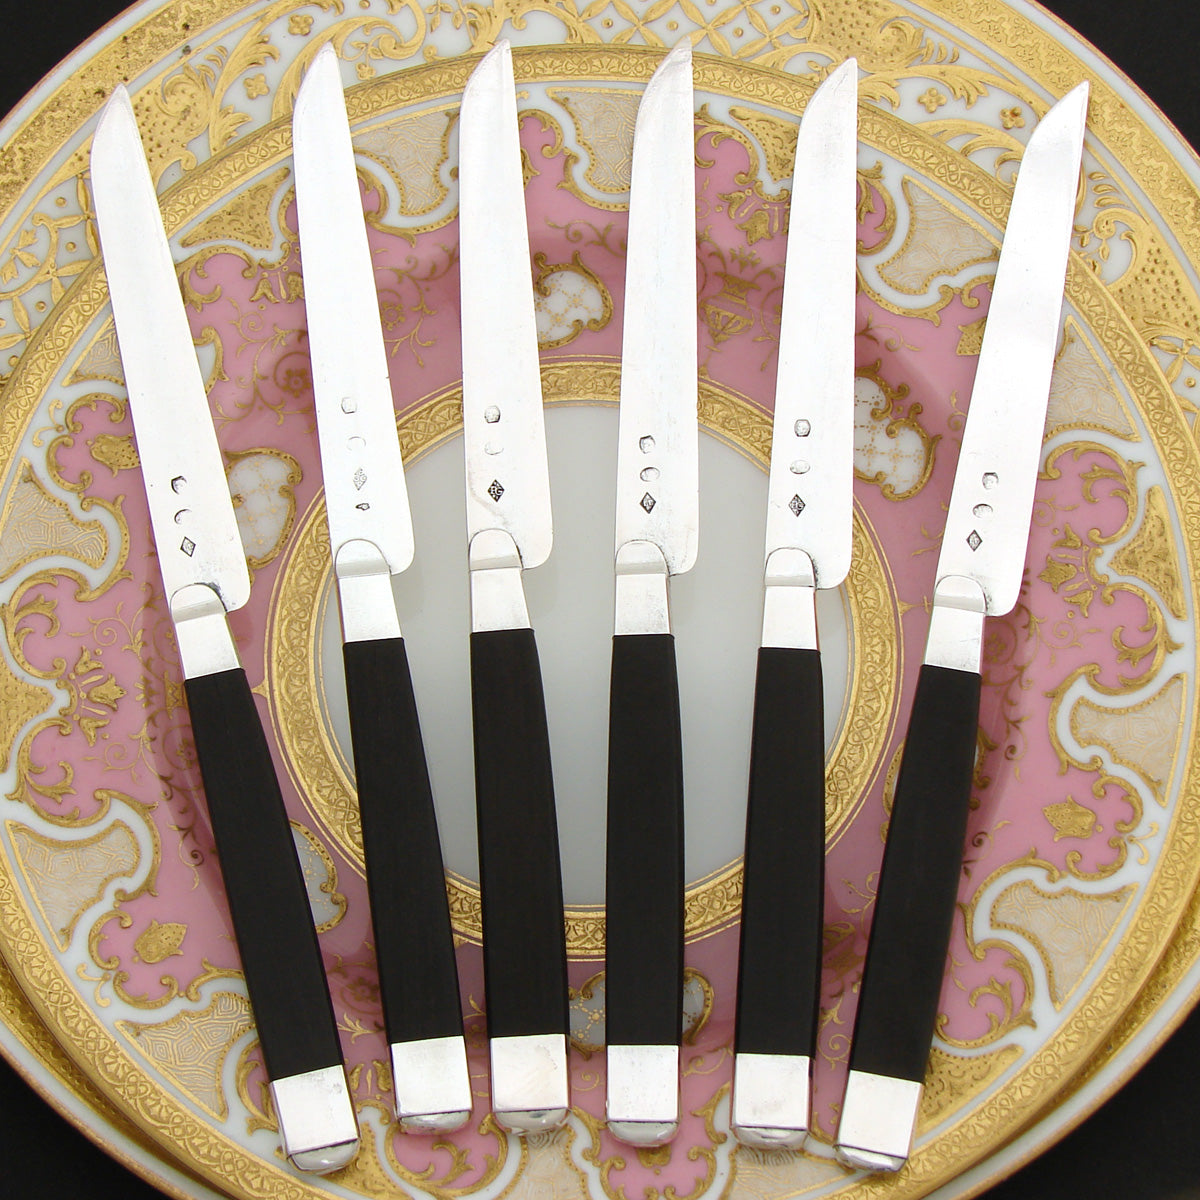 Antique French 1819-1838 .800 (nearly sterling) Silver 6pc Entremet, Luncheon or Fruit Knife Set